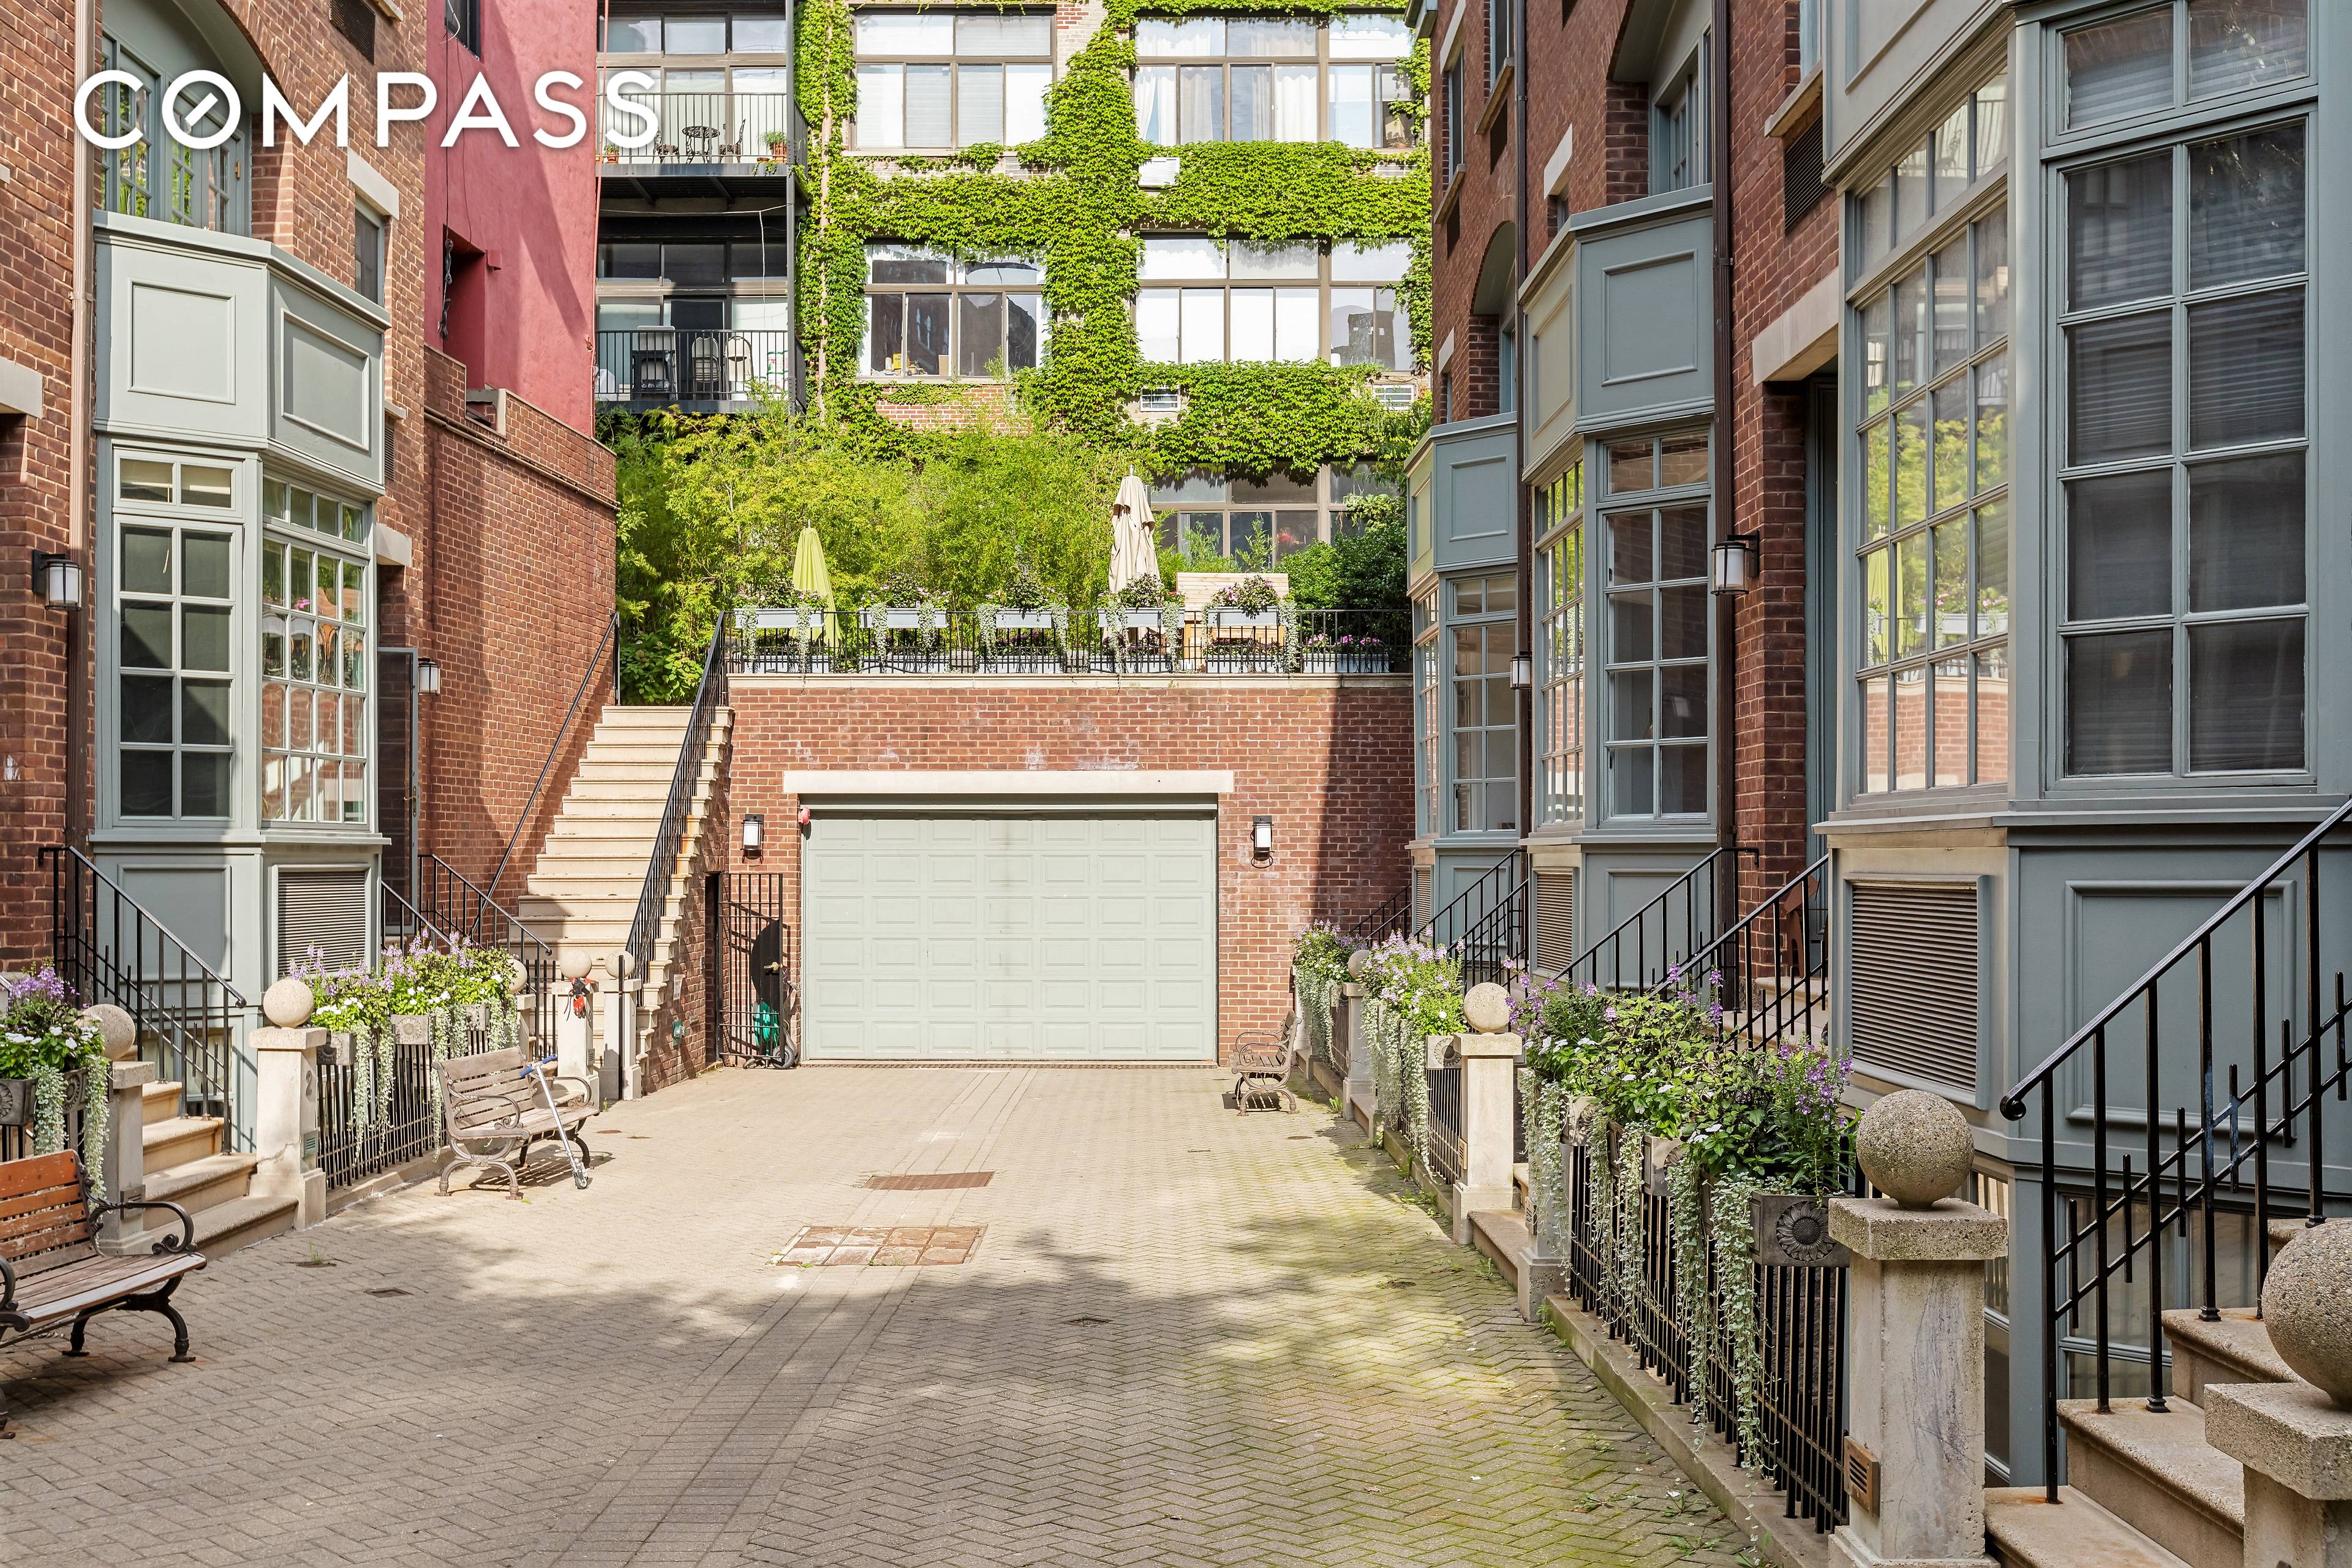 Available for immediate occupancy and parking spot included Situated in the private gated community that is the West Village Mews sits this 20 wide, single family townhouse.